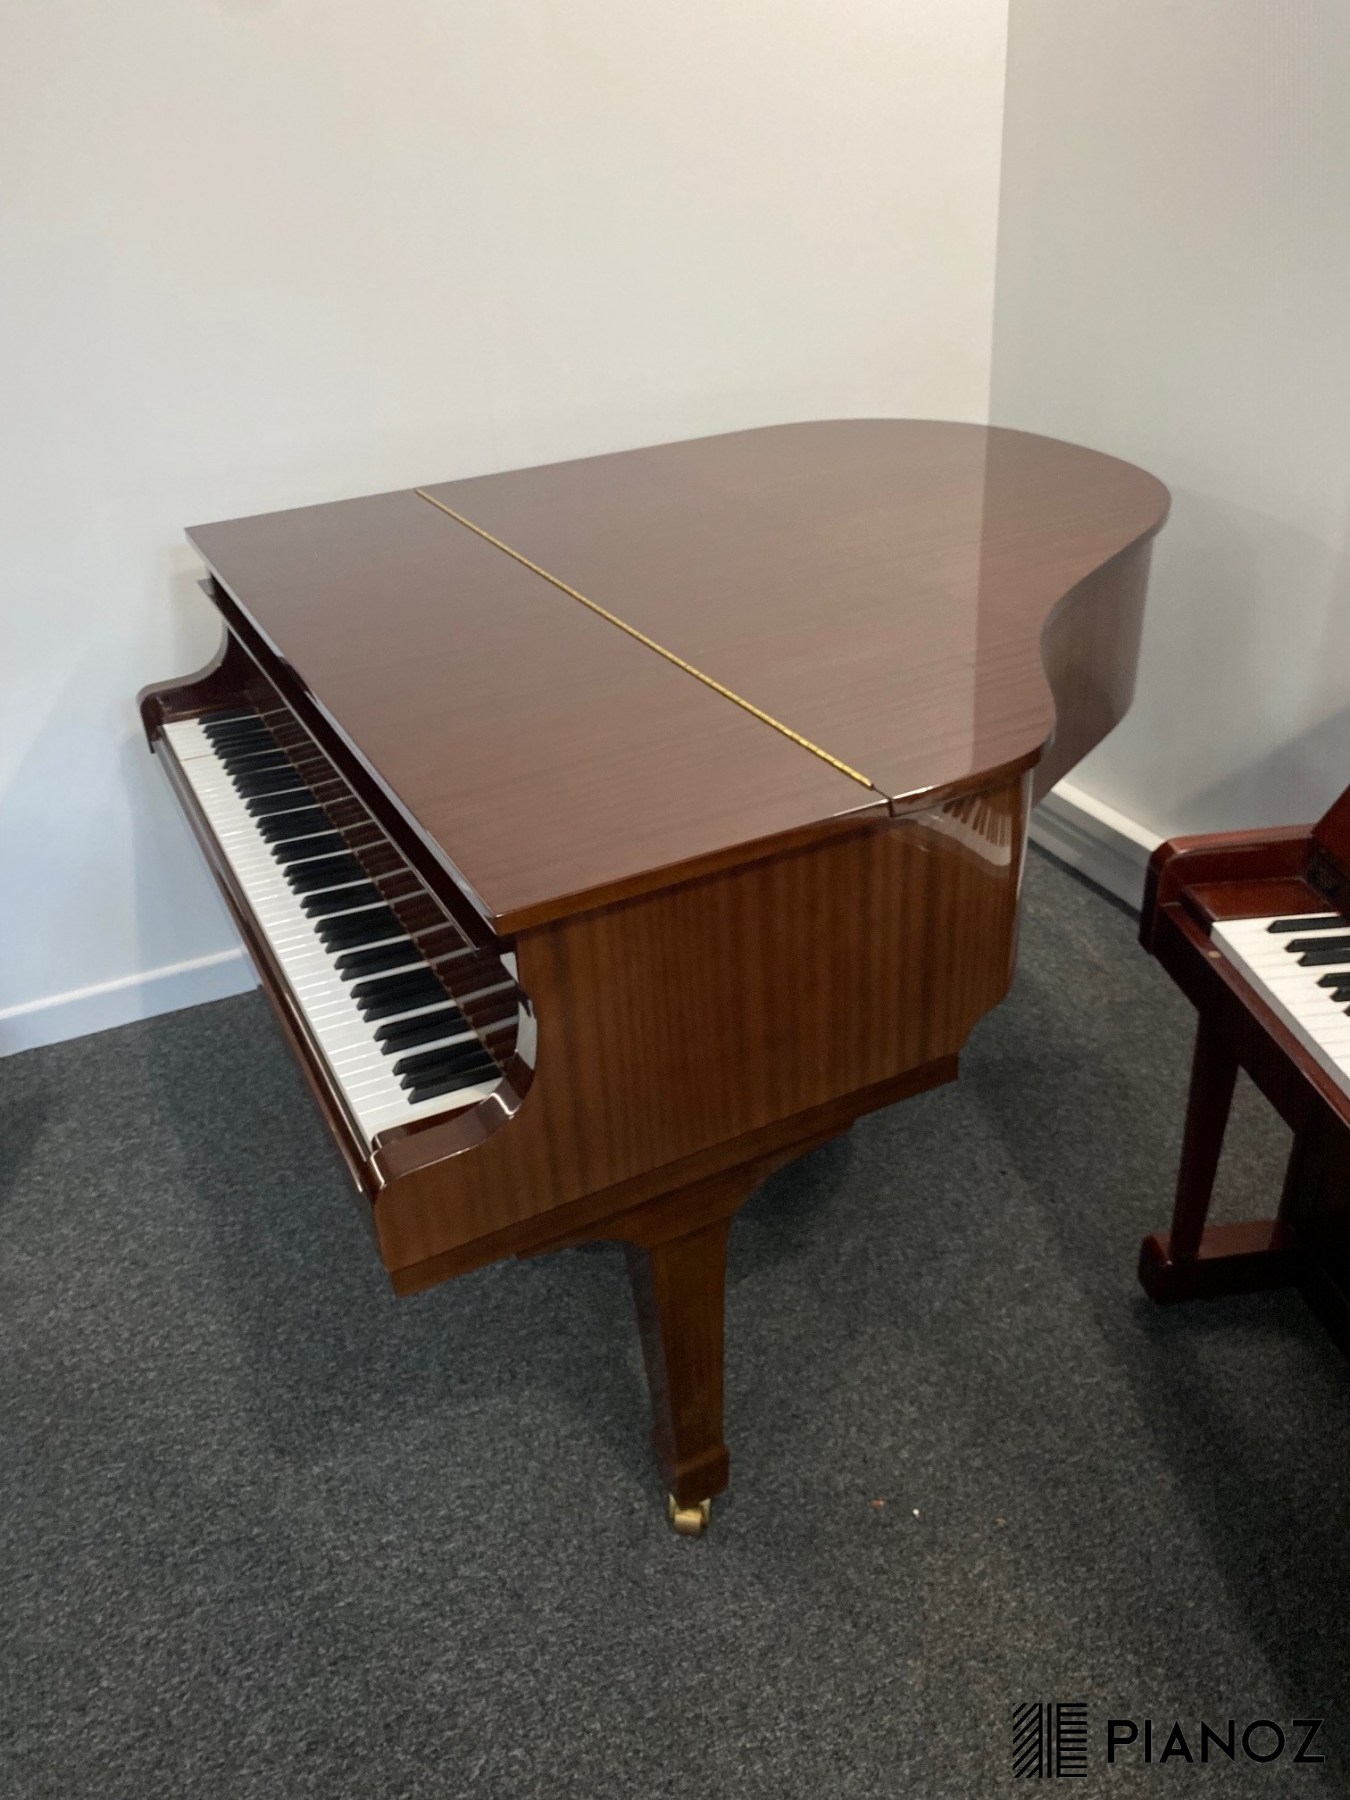 Yamaha G1 Japanese Baby Grand Piano piano for sale in UK